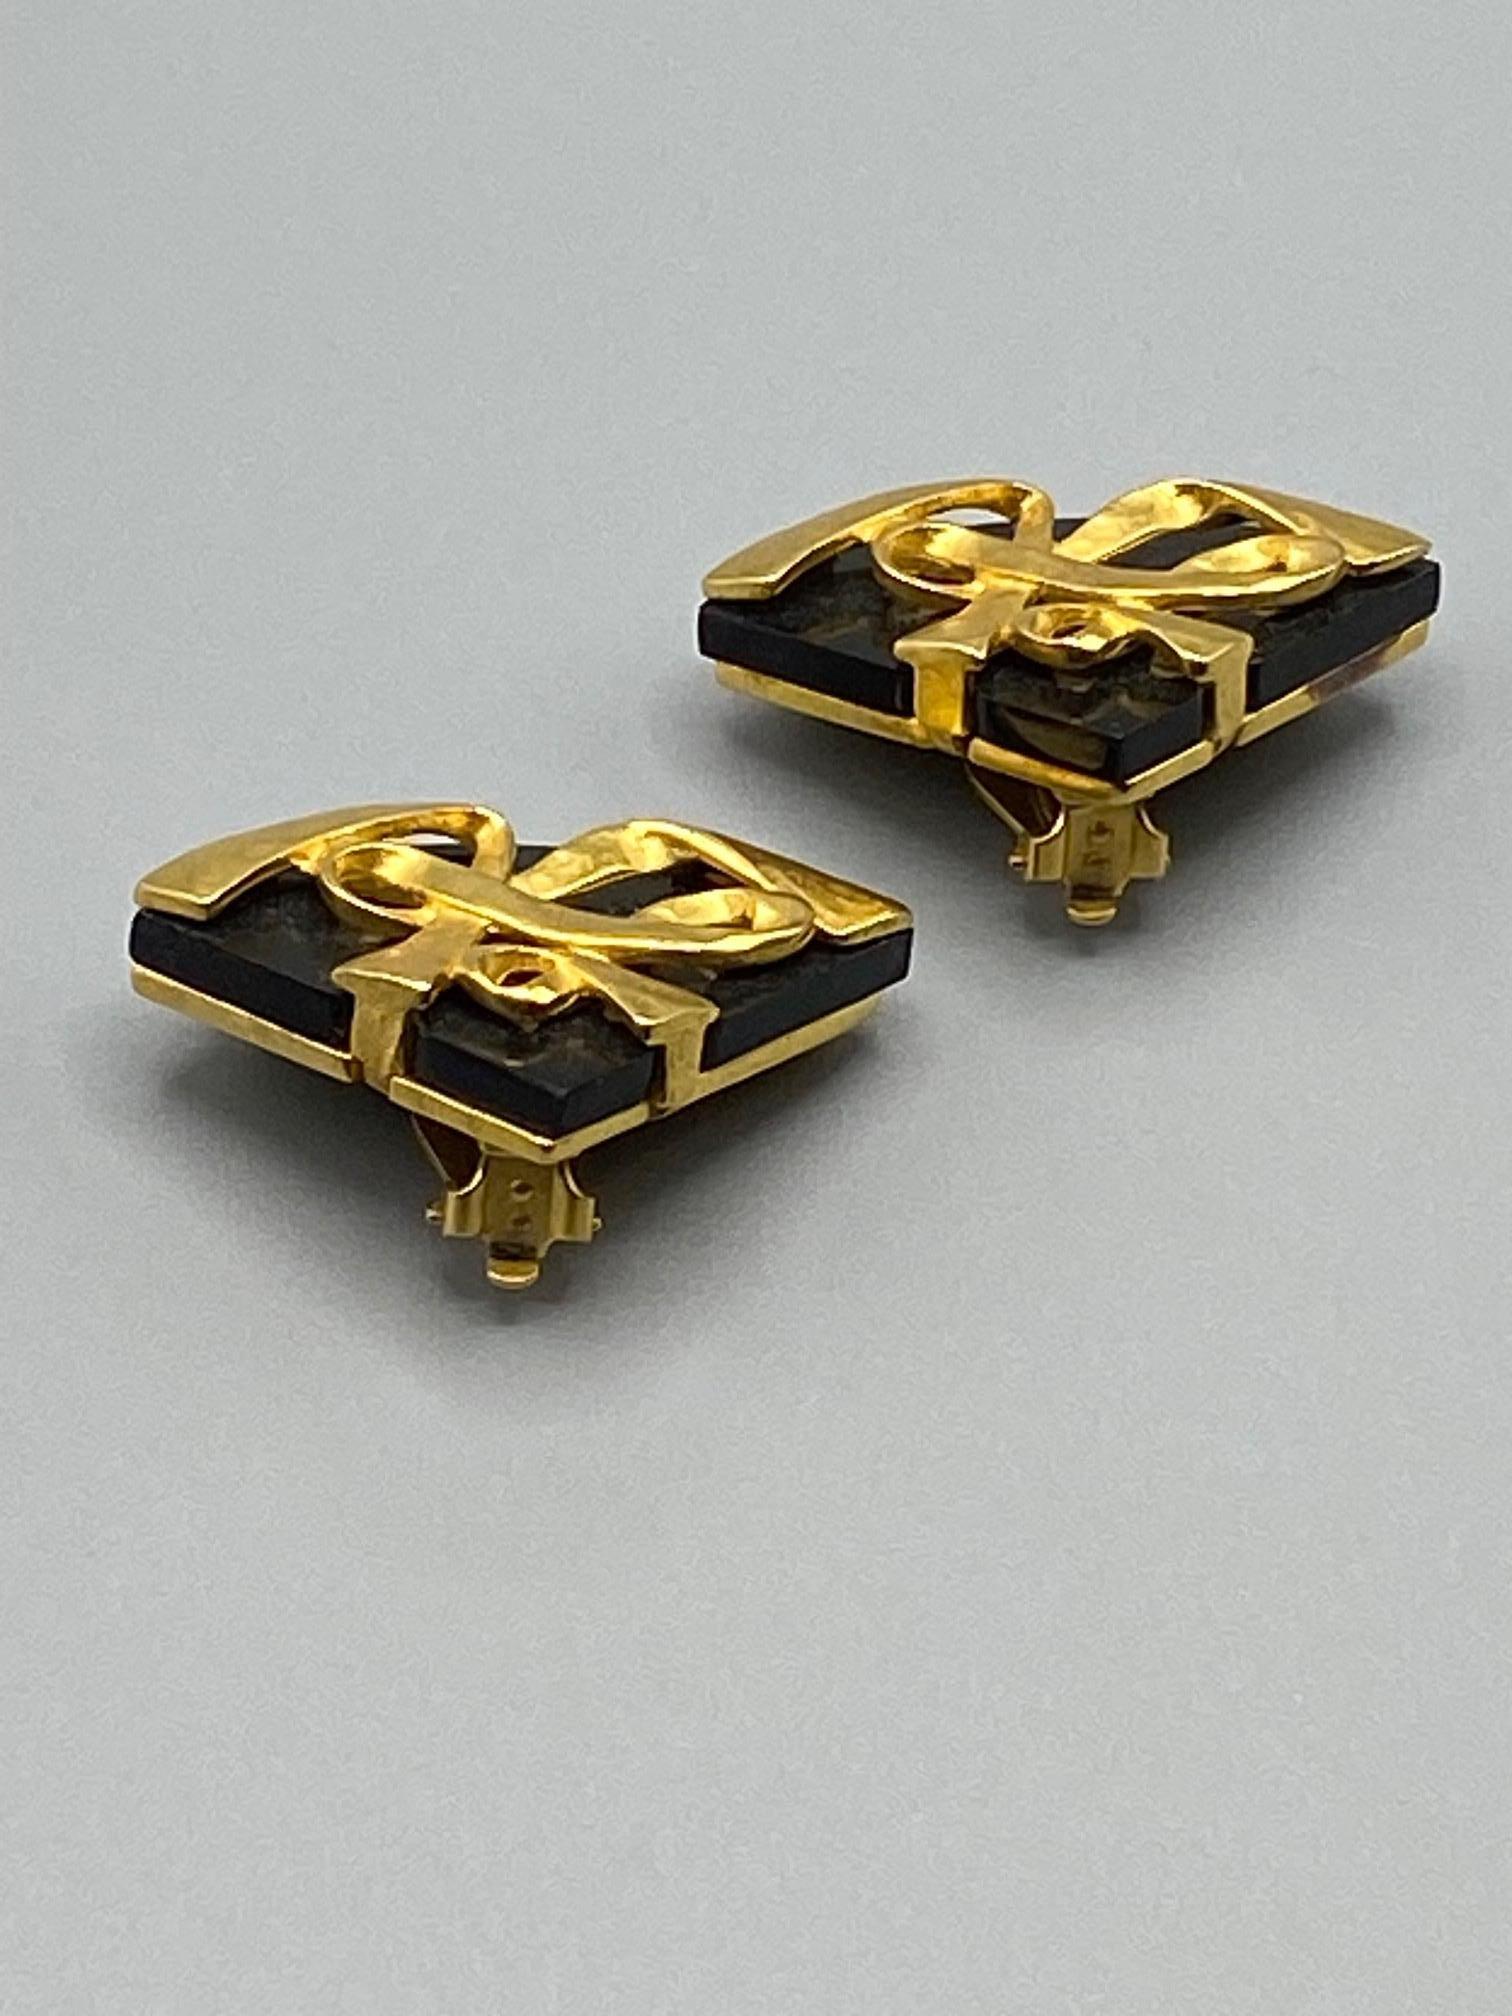 A beautiful pair of Karl Lagerfeld fan shape earrings from the mid to ate 1980s. The Lagerfeld fan is synonymous with his script KL initials as the company logo. Each earring is a rich satin gold tone and black resin. The ribbon style KL initials